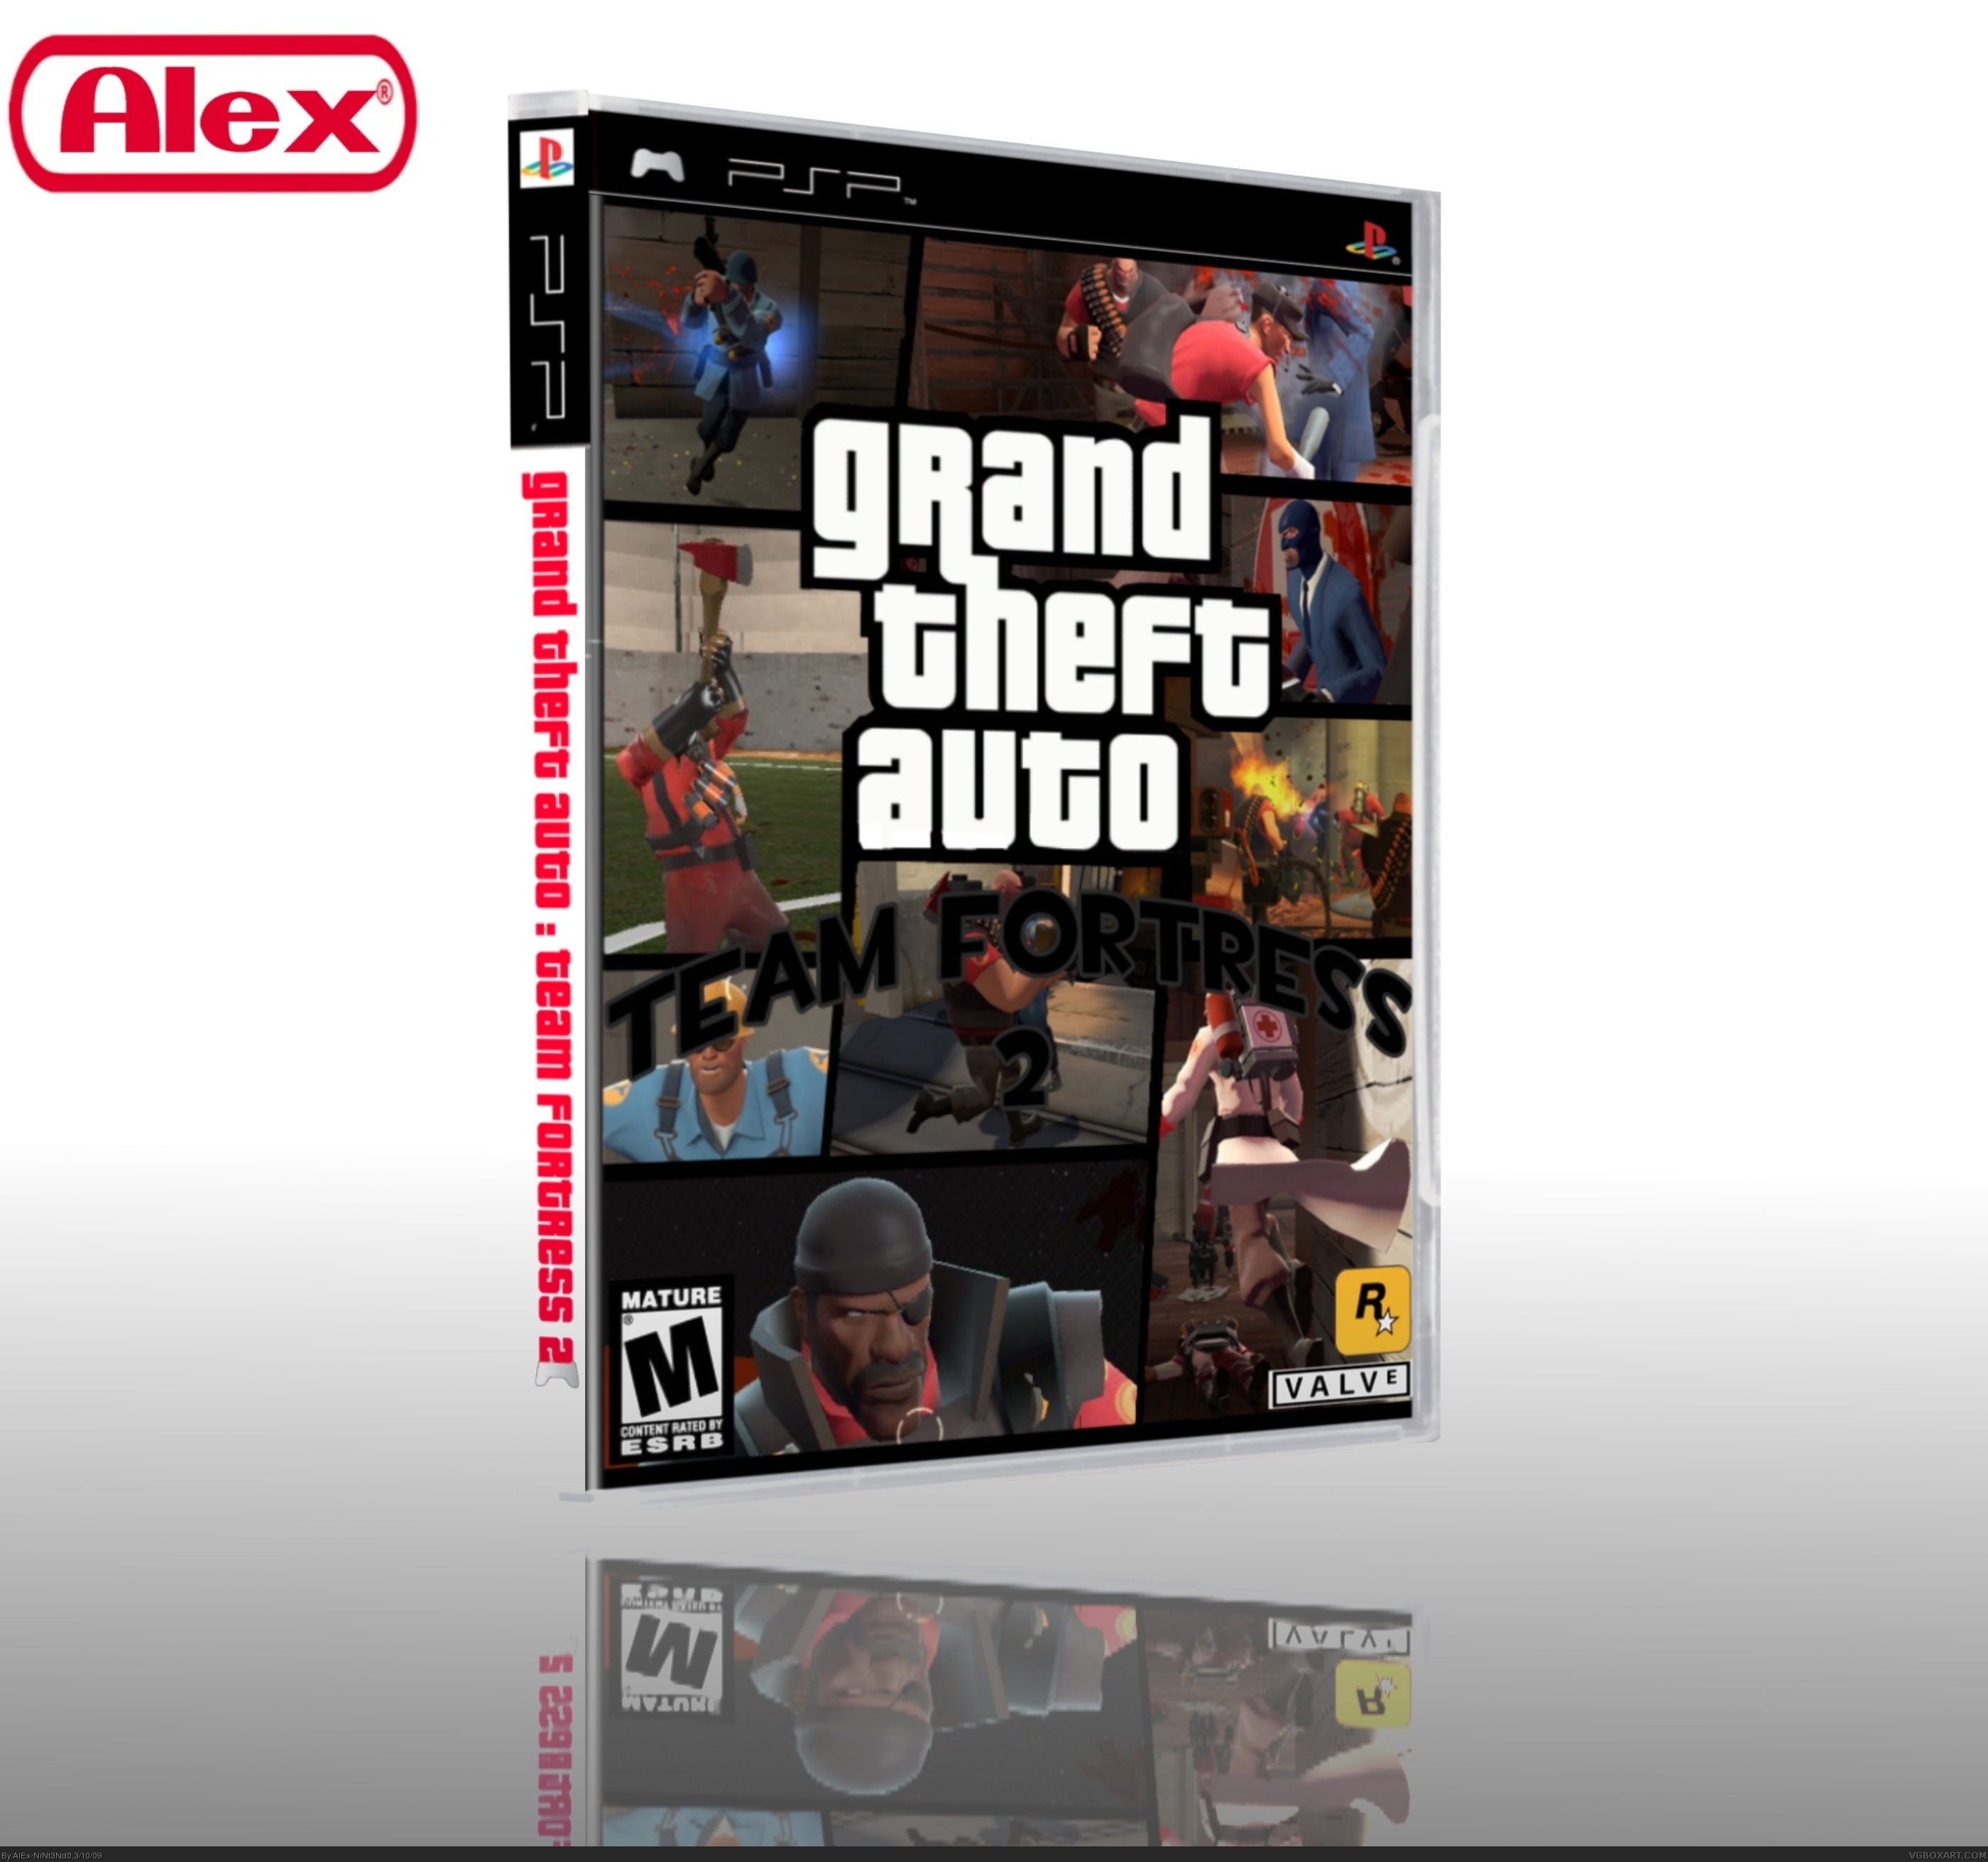 Viewing full size Grand Theft Auto: Team Fortress box cover